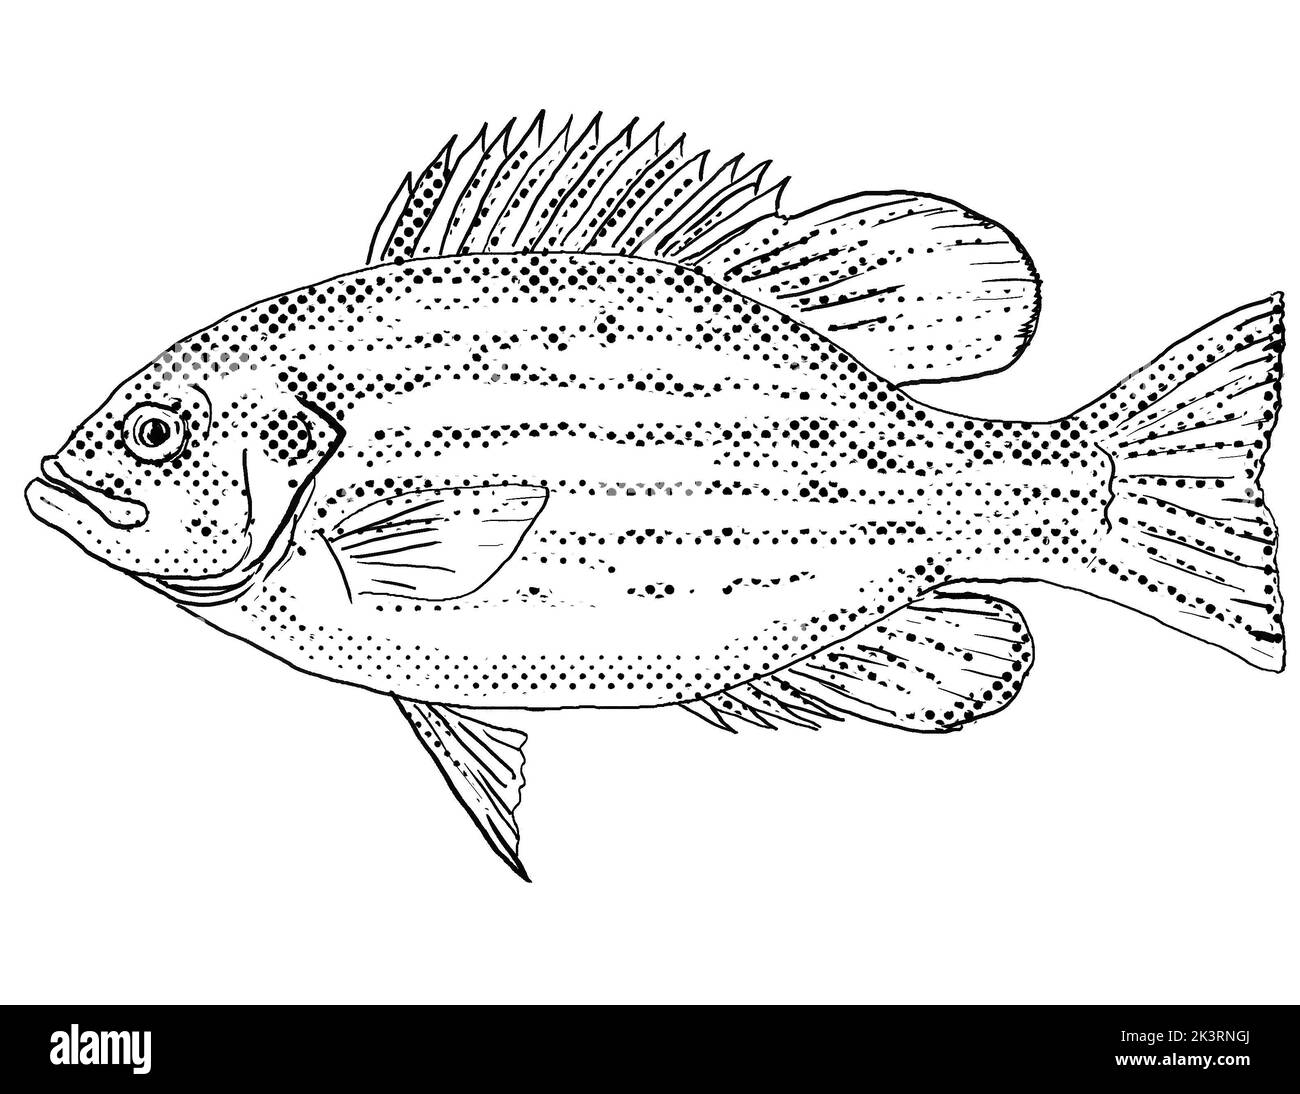 Cartoon style line drawing of a rock bass Ambloplites rupestris rock perch, goggle-eye, red eye or black perch, a freshwater fish with halftone dots. Stock Photo